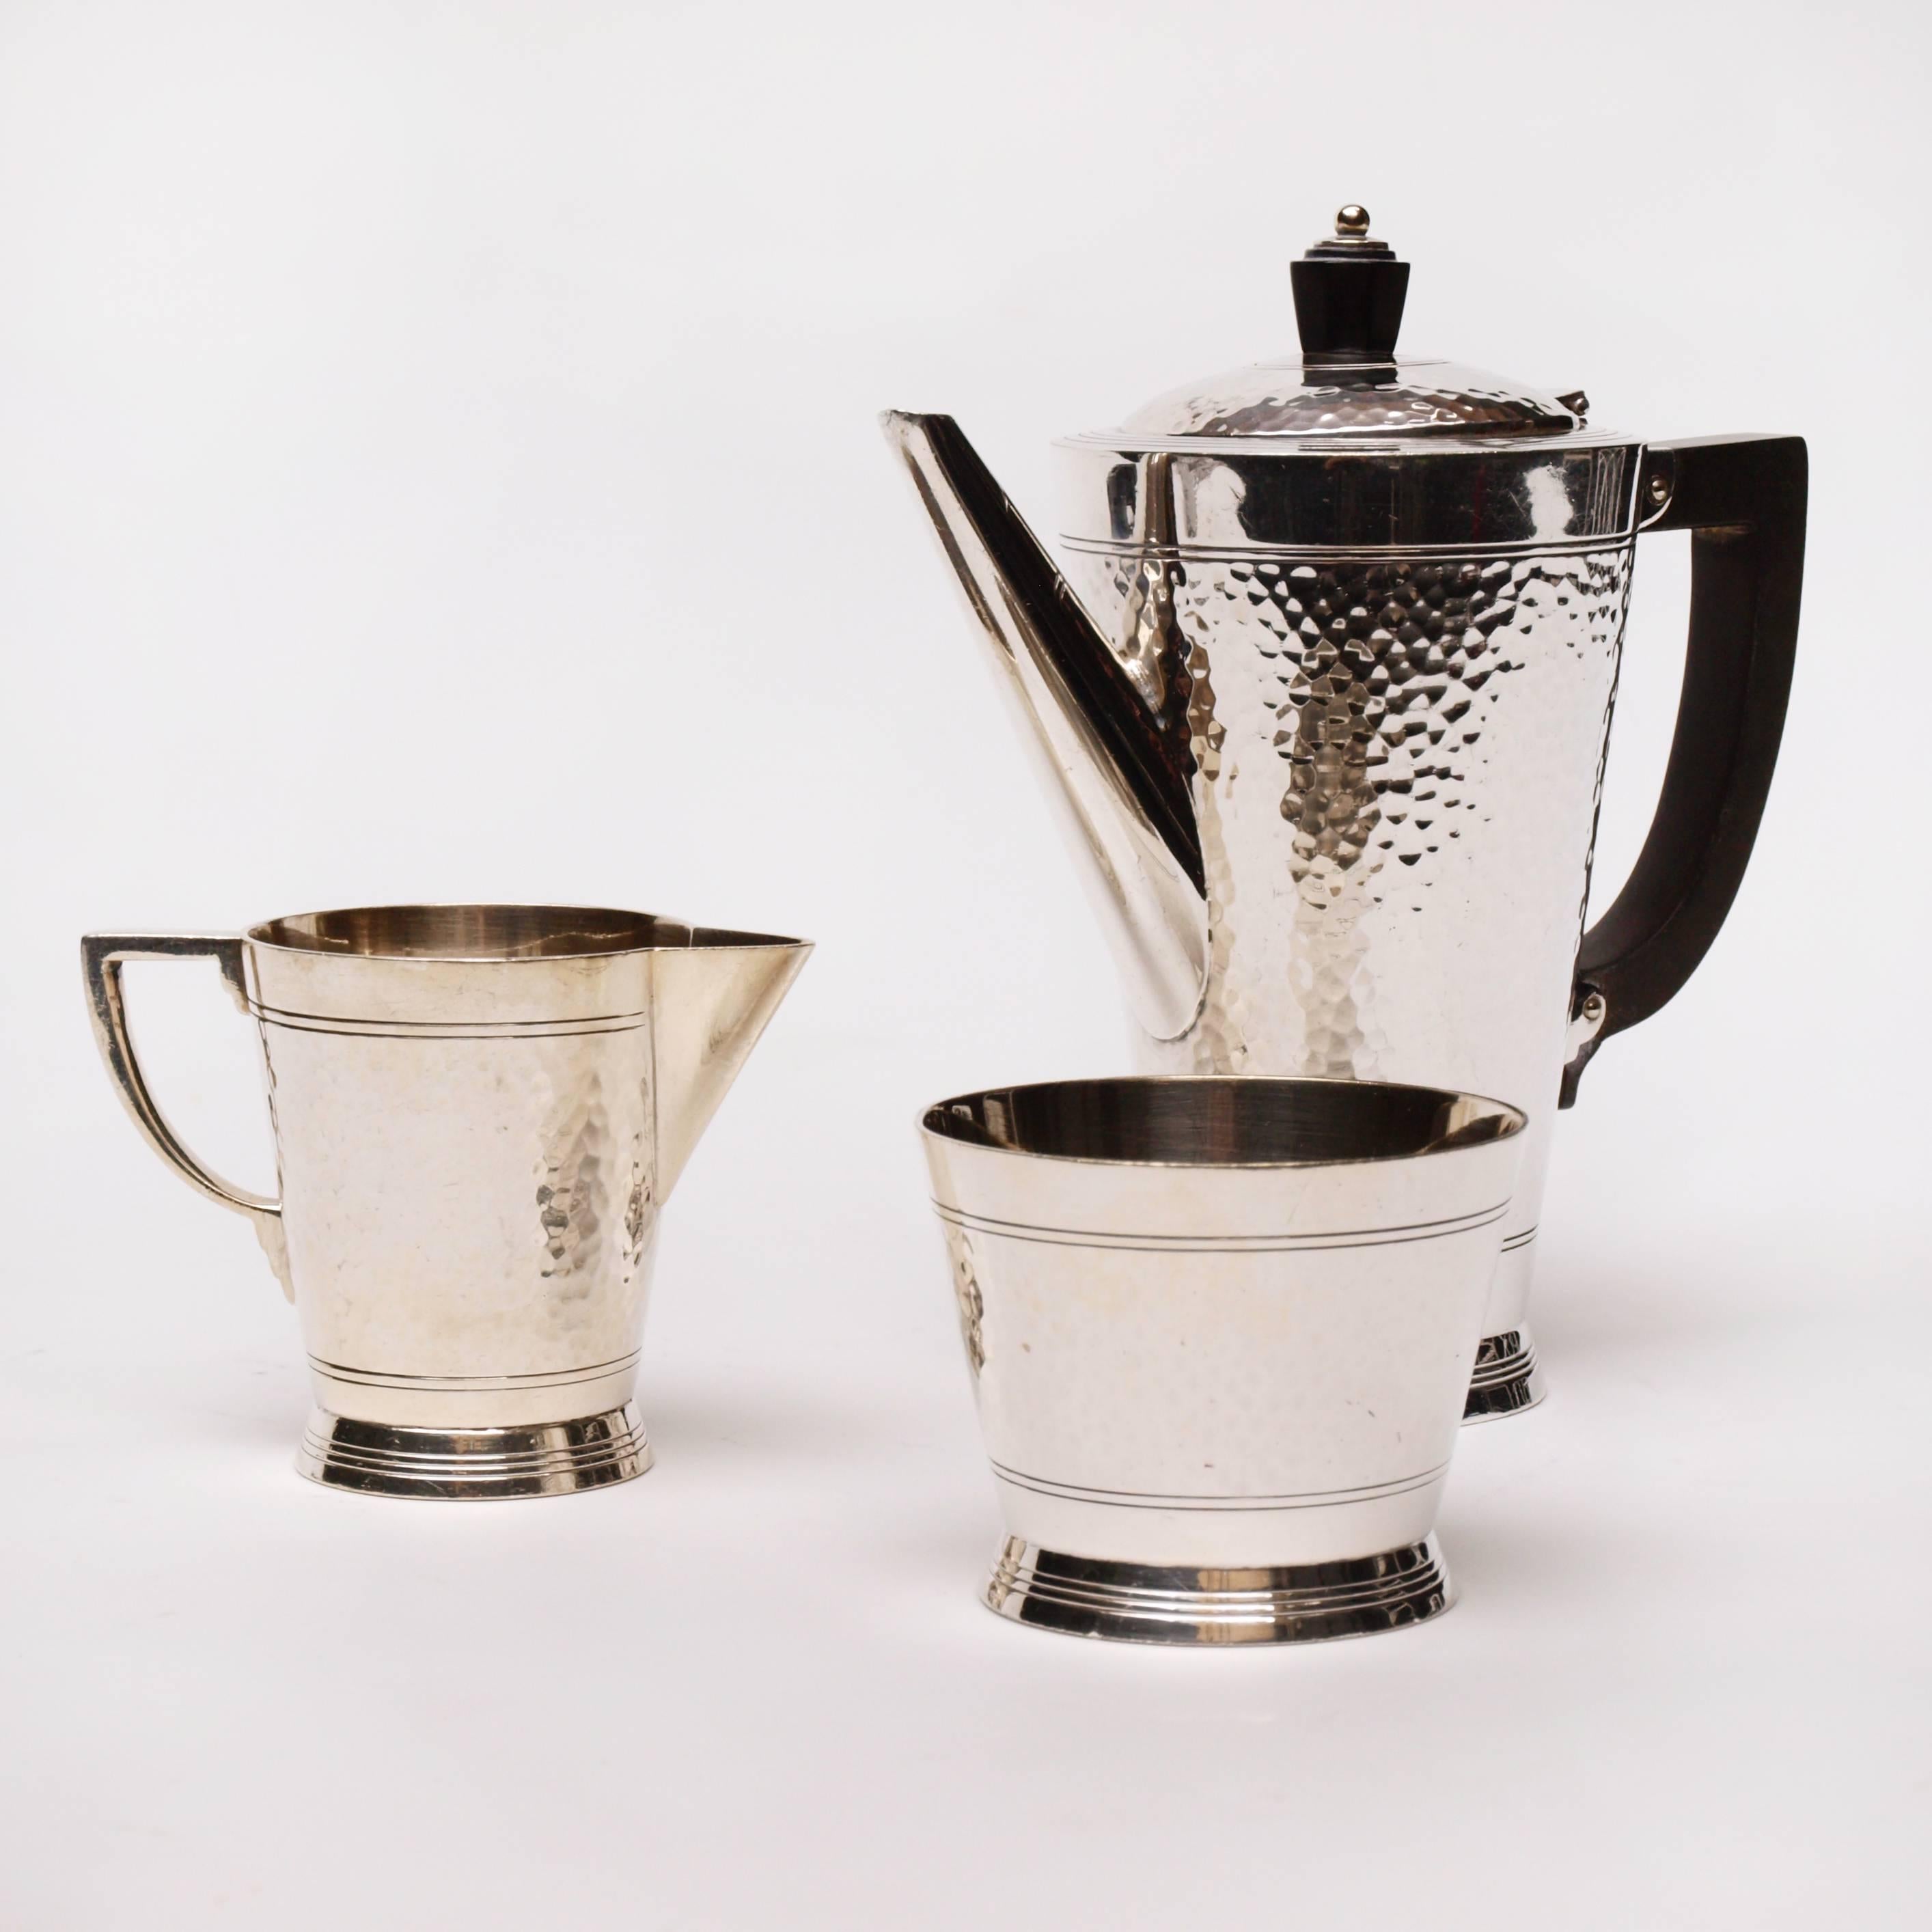 An exquisite three-piece Art Deco coffee set designed by Keith Murray for Mappin and Webb. The silver plated set comprises of a small sugar pot, milk jug and two-cup teapot. All three pieces are embellished with etched pin stripes around the